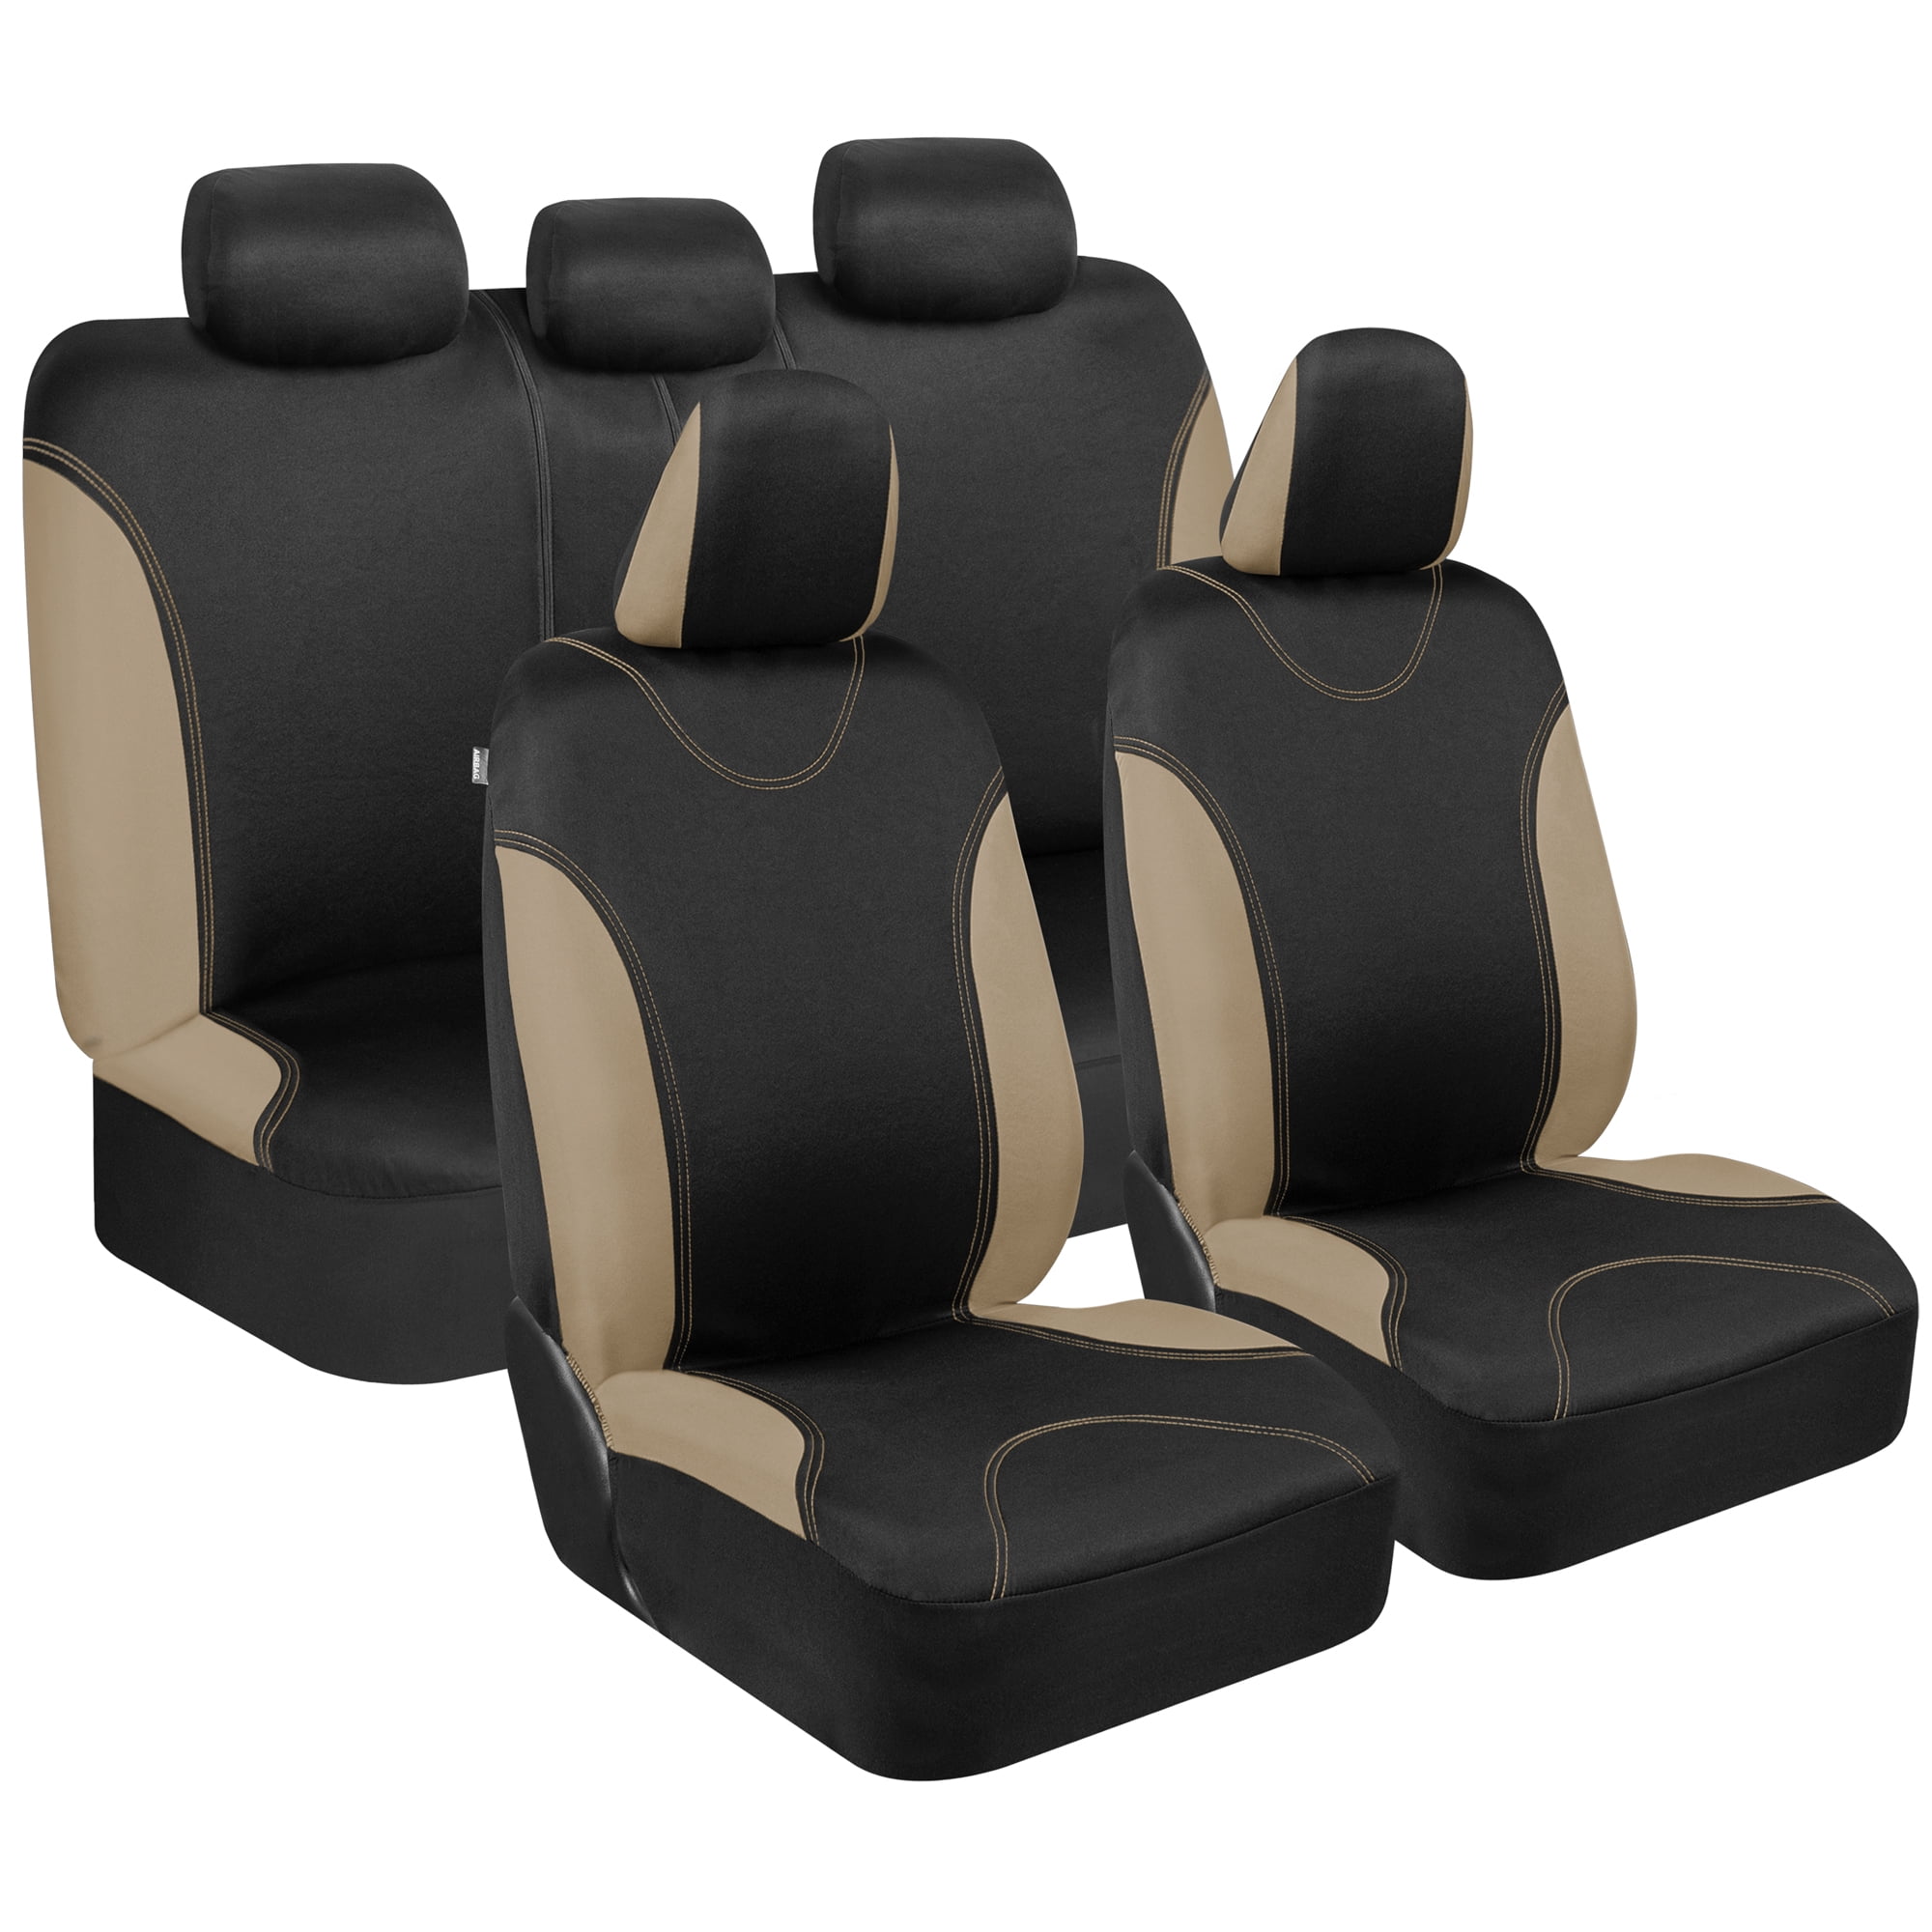 BDK UltraSleek Black Seat Covers for Cars Full Set, Two-Tone Front